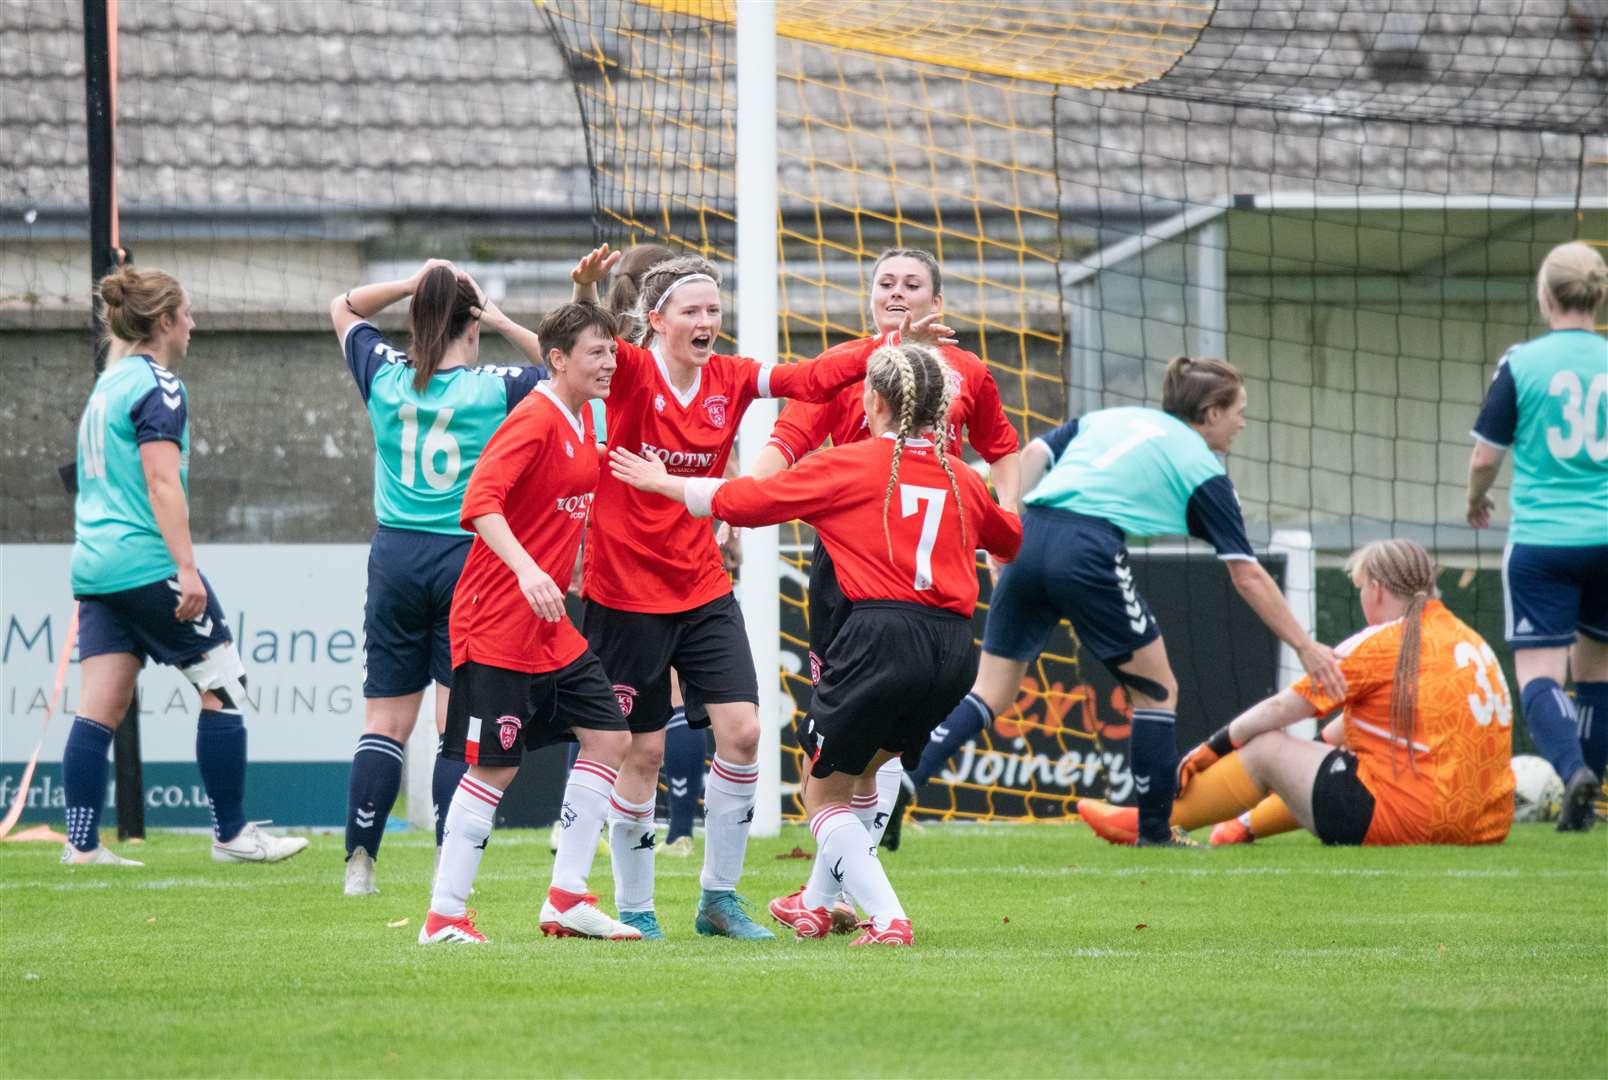 Caithness Ladies celebrate after going ahead through an own goal. Picture: Daniel Forsyth